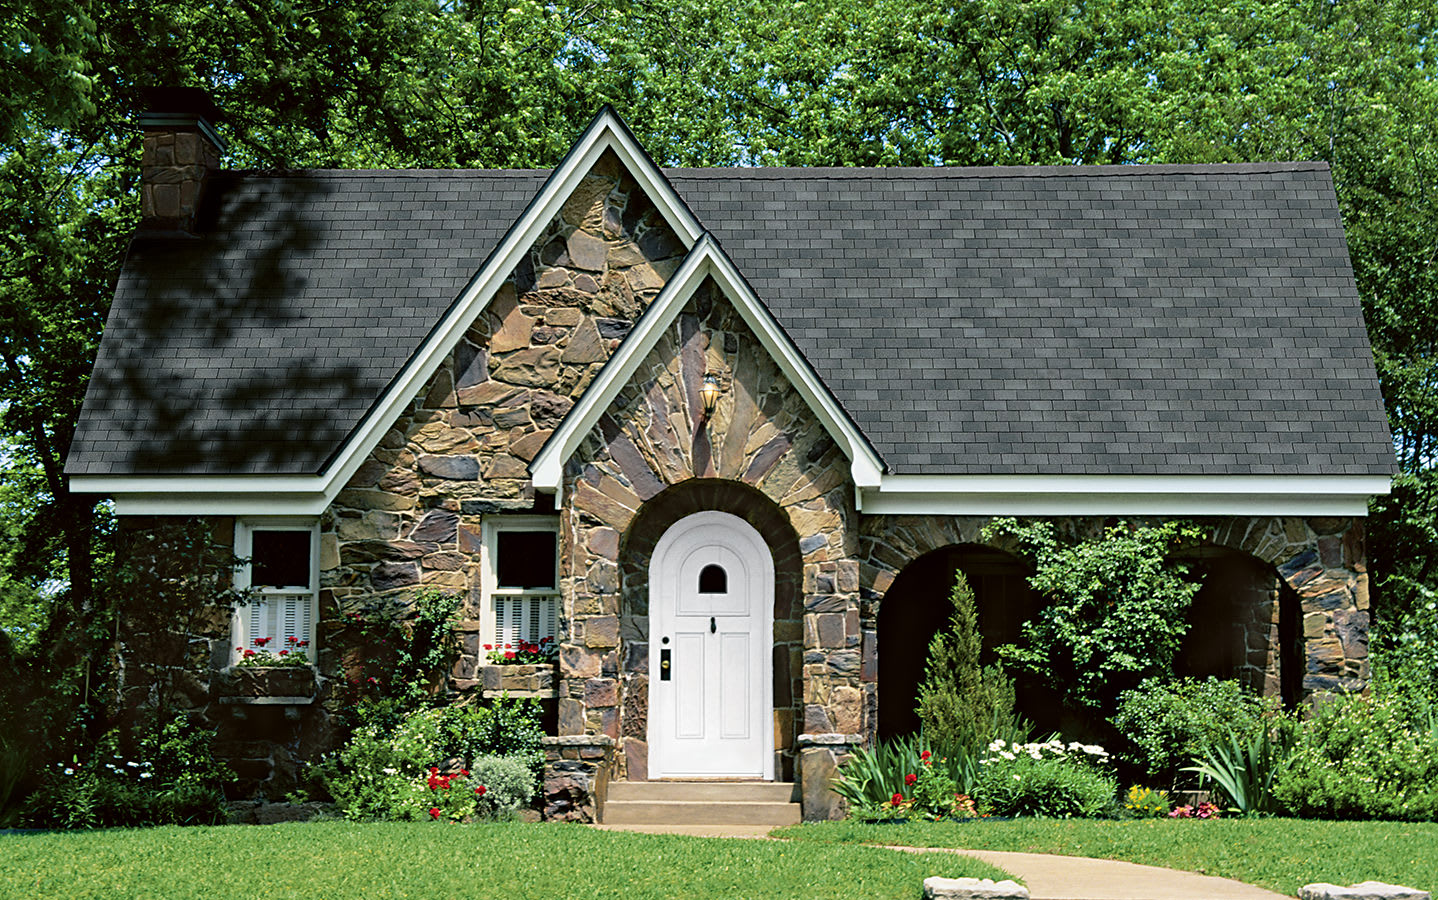 House with Owens Corning Supreme shingles in Estate Gray